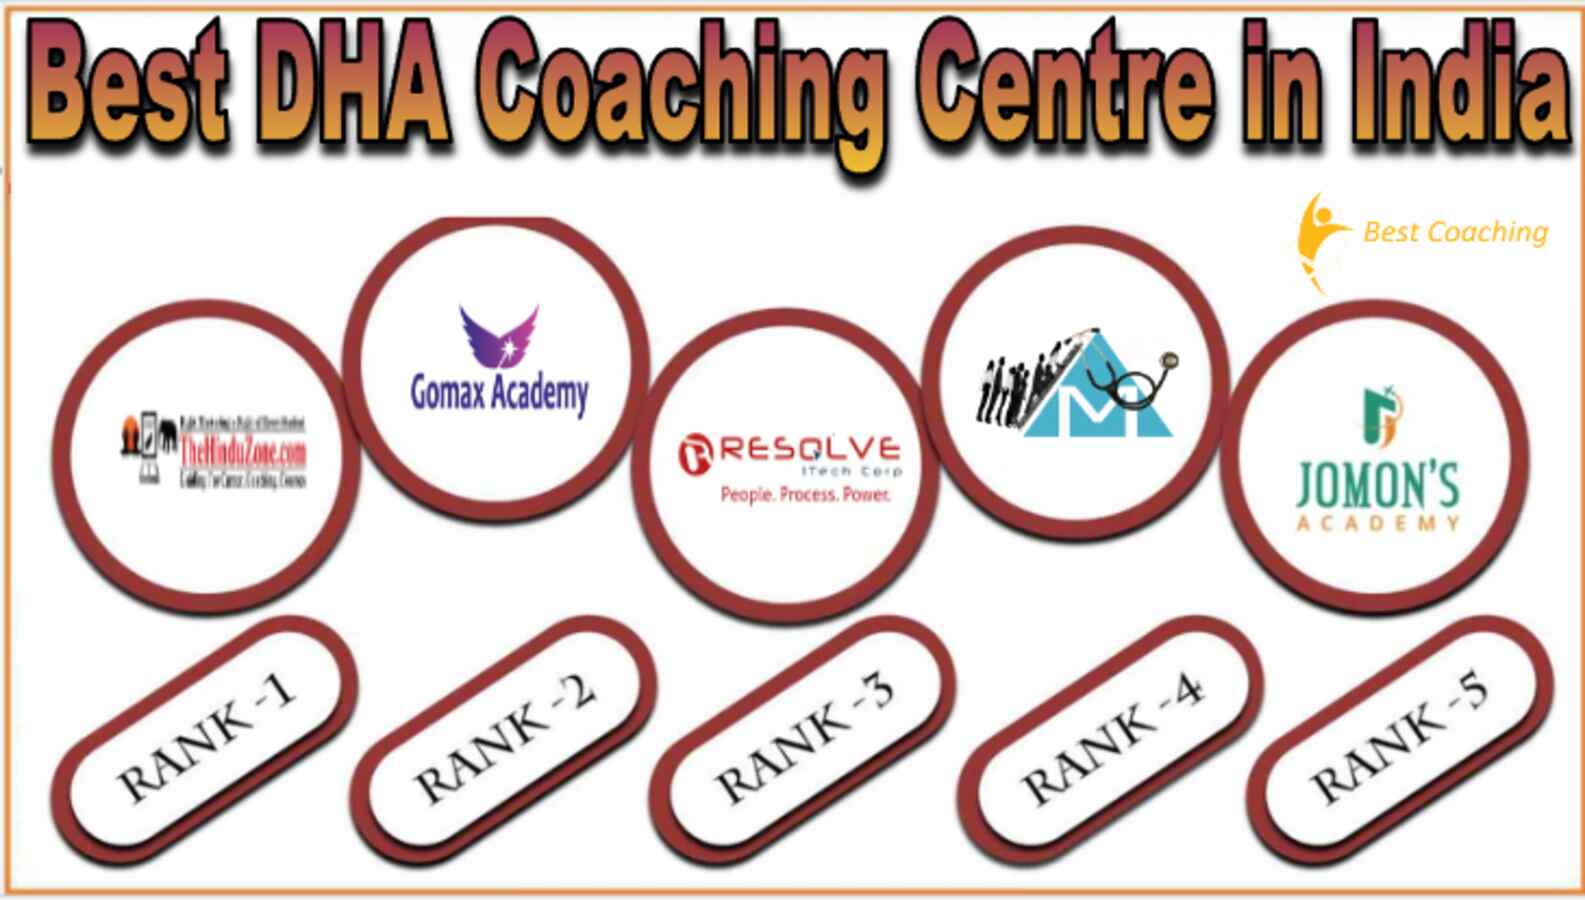 Best DHA Coaching Centre in India